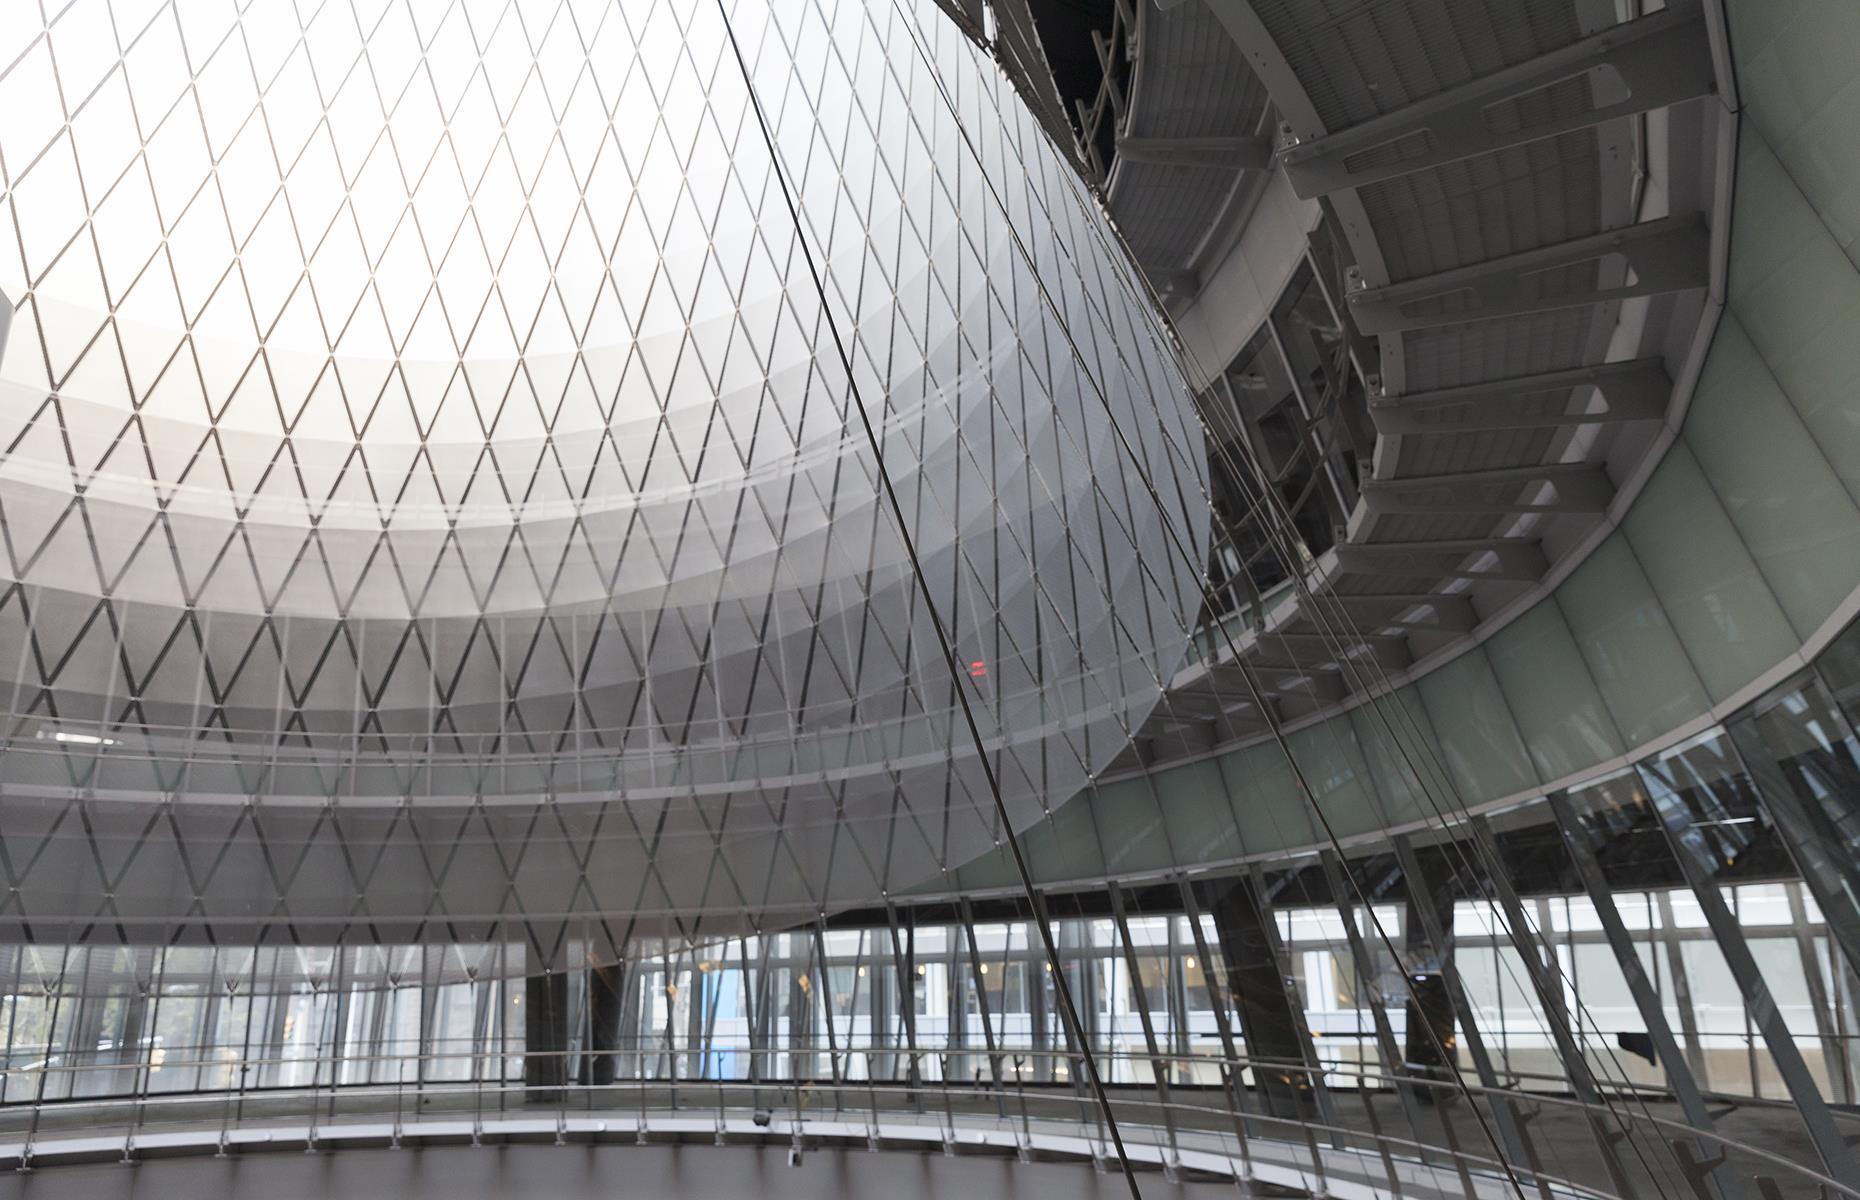 It’s safe to say that most of the New York subway stations are not nice to look at, however, Fulton Transit Centre in Lower Manhattan is a wonderful exception. Connecting nine subway lines, the station was opened in 2014 and its main feature is its massive dome.